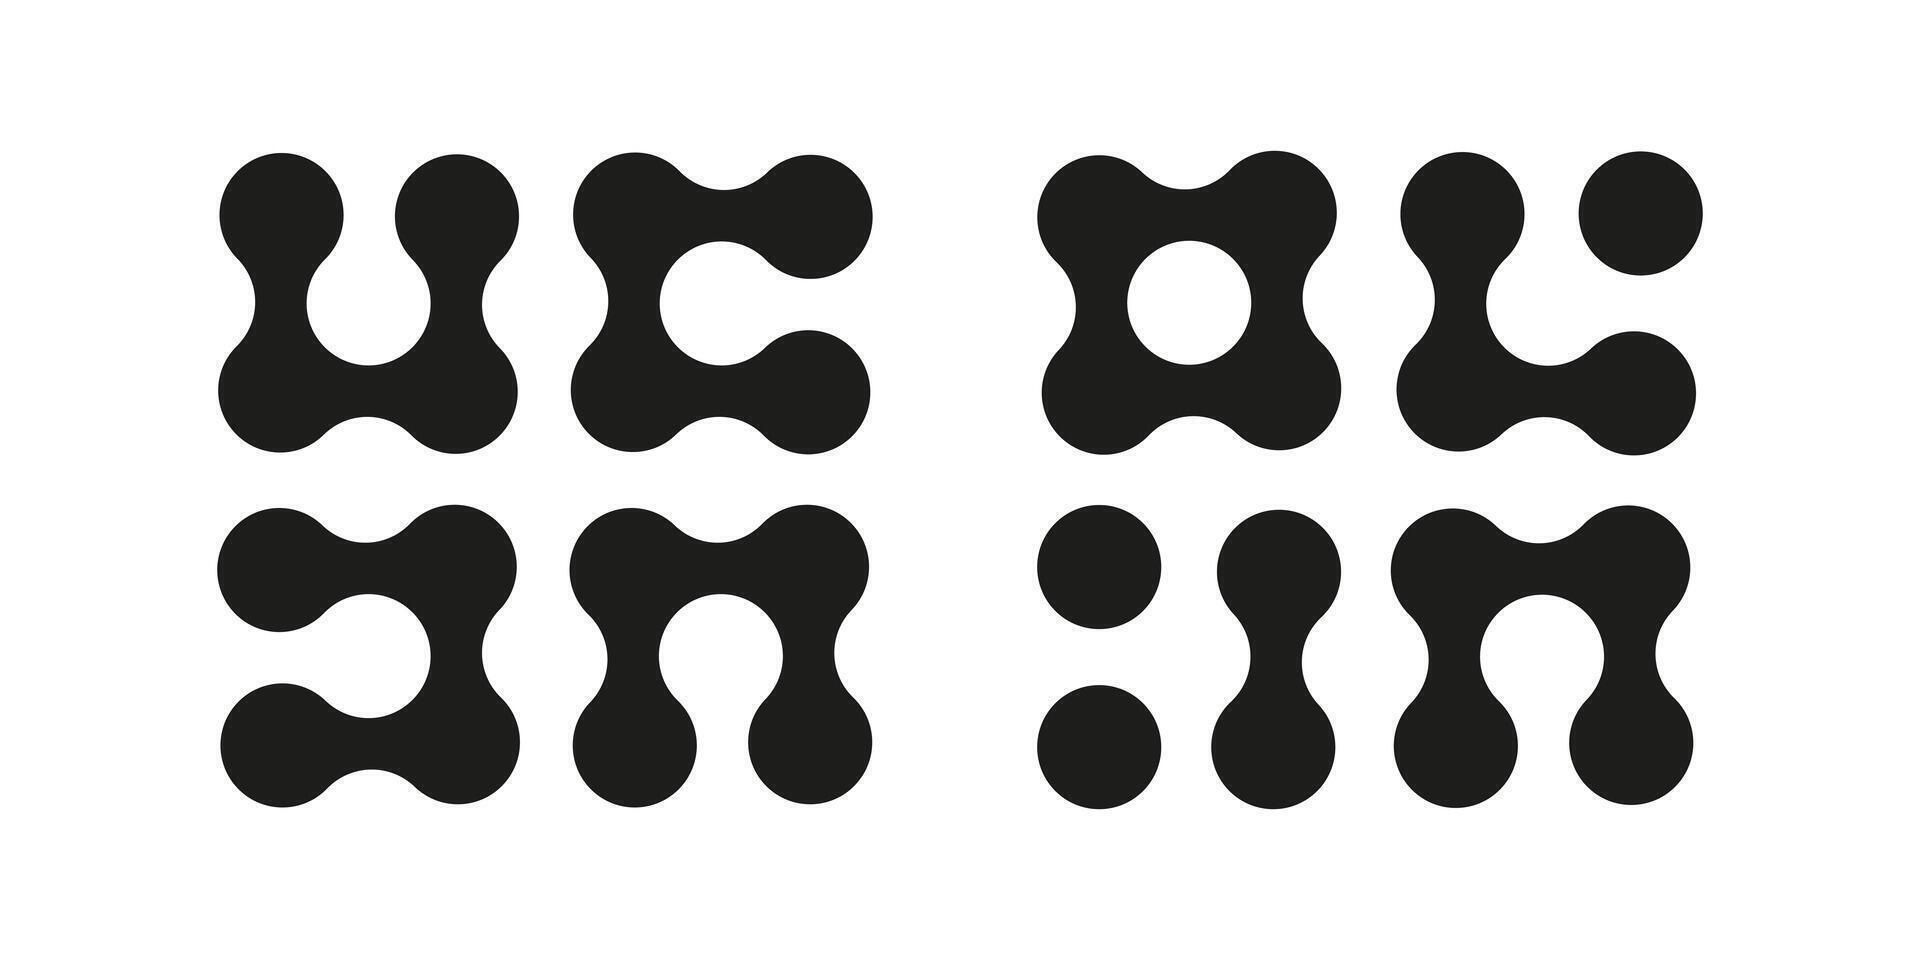 Metaball icons. Connected dots signs. Integration abstract symbol. Circles simple pattern. Point movement. Connected blobs. Metaballs transition. Set of flat logos. Vector graphic illustration.